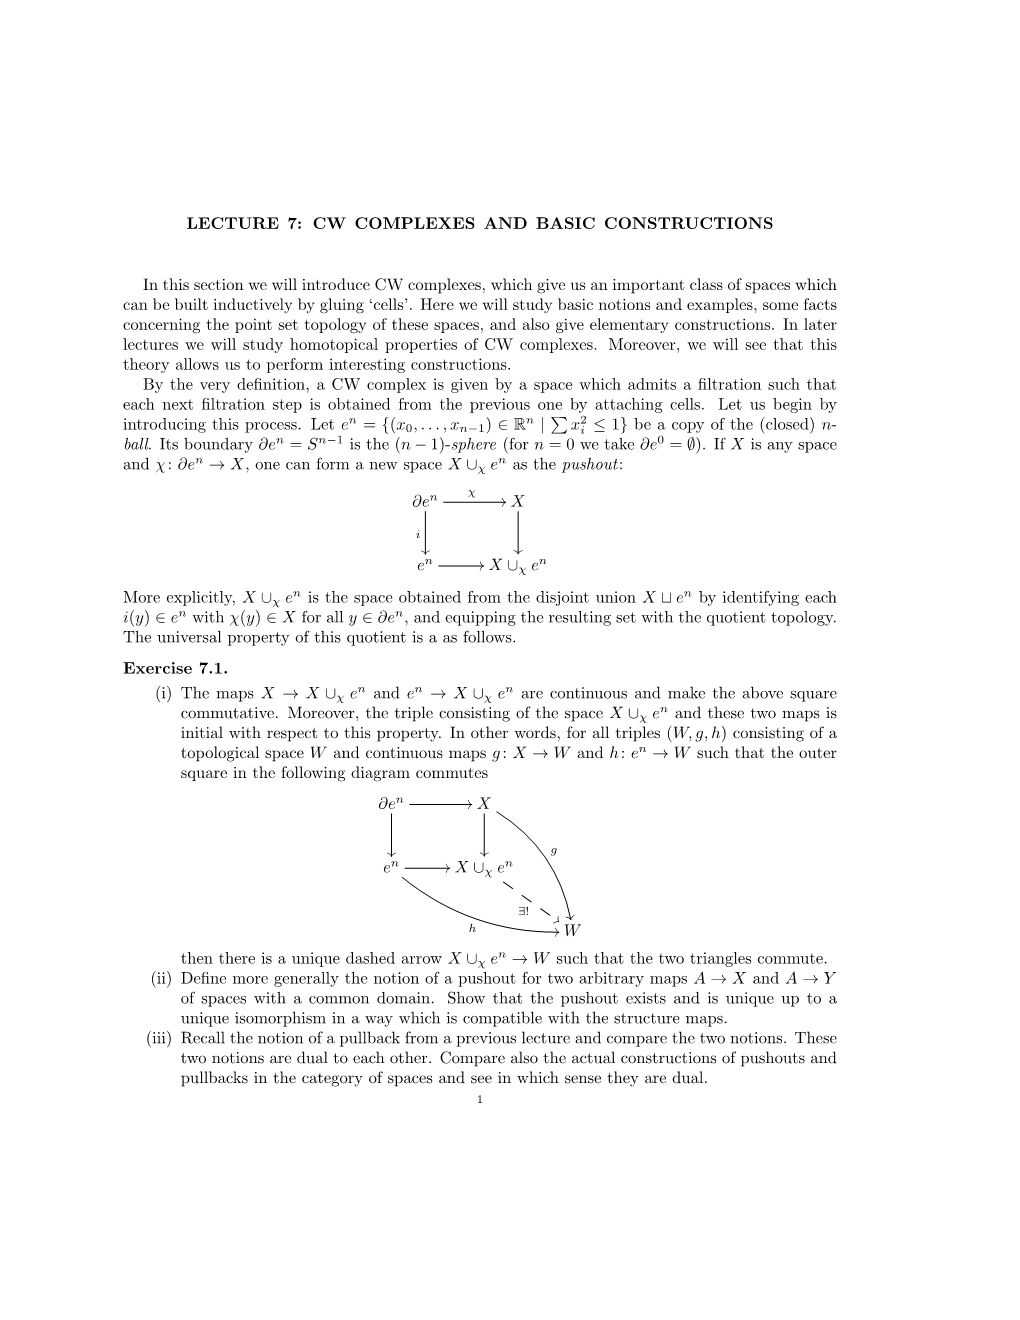 LECTURE 7: CW COMPLEXES and BASIC CONSTRUCTIONS in This